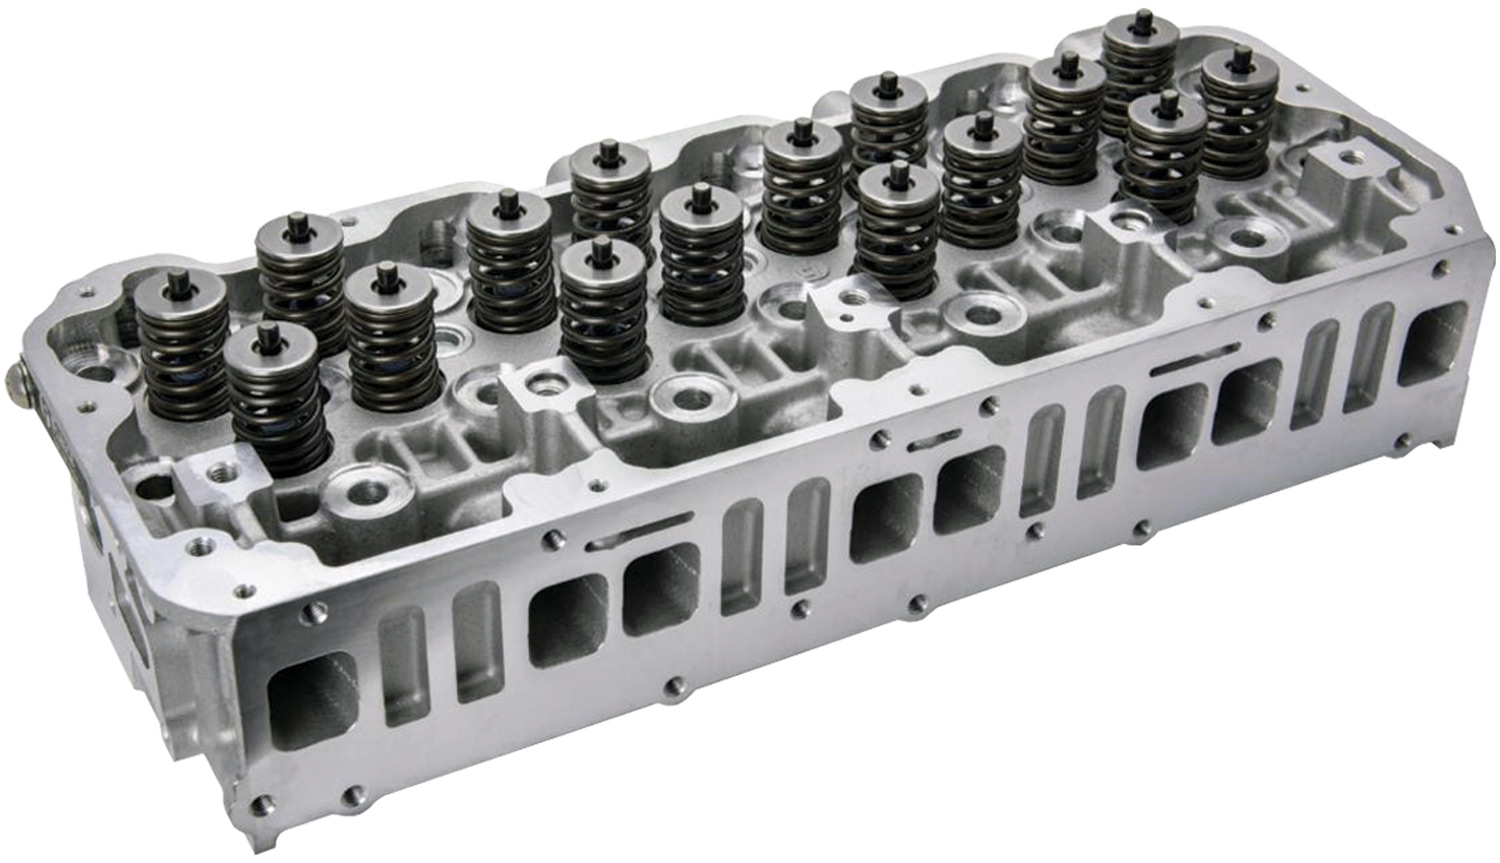 Freedom Series cylinder heads with a cupless injector